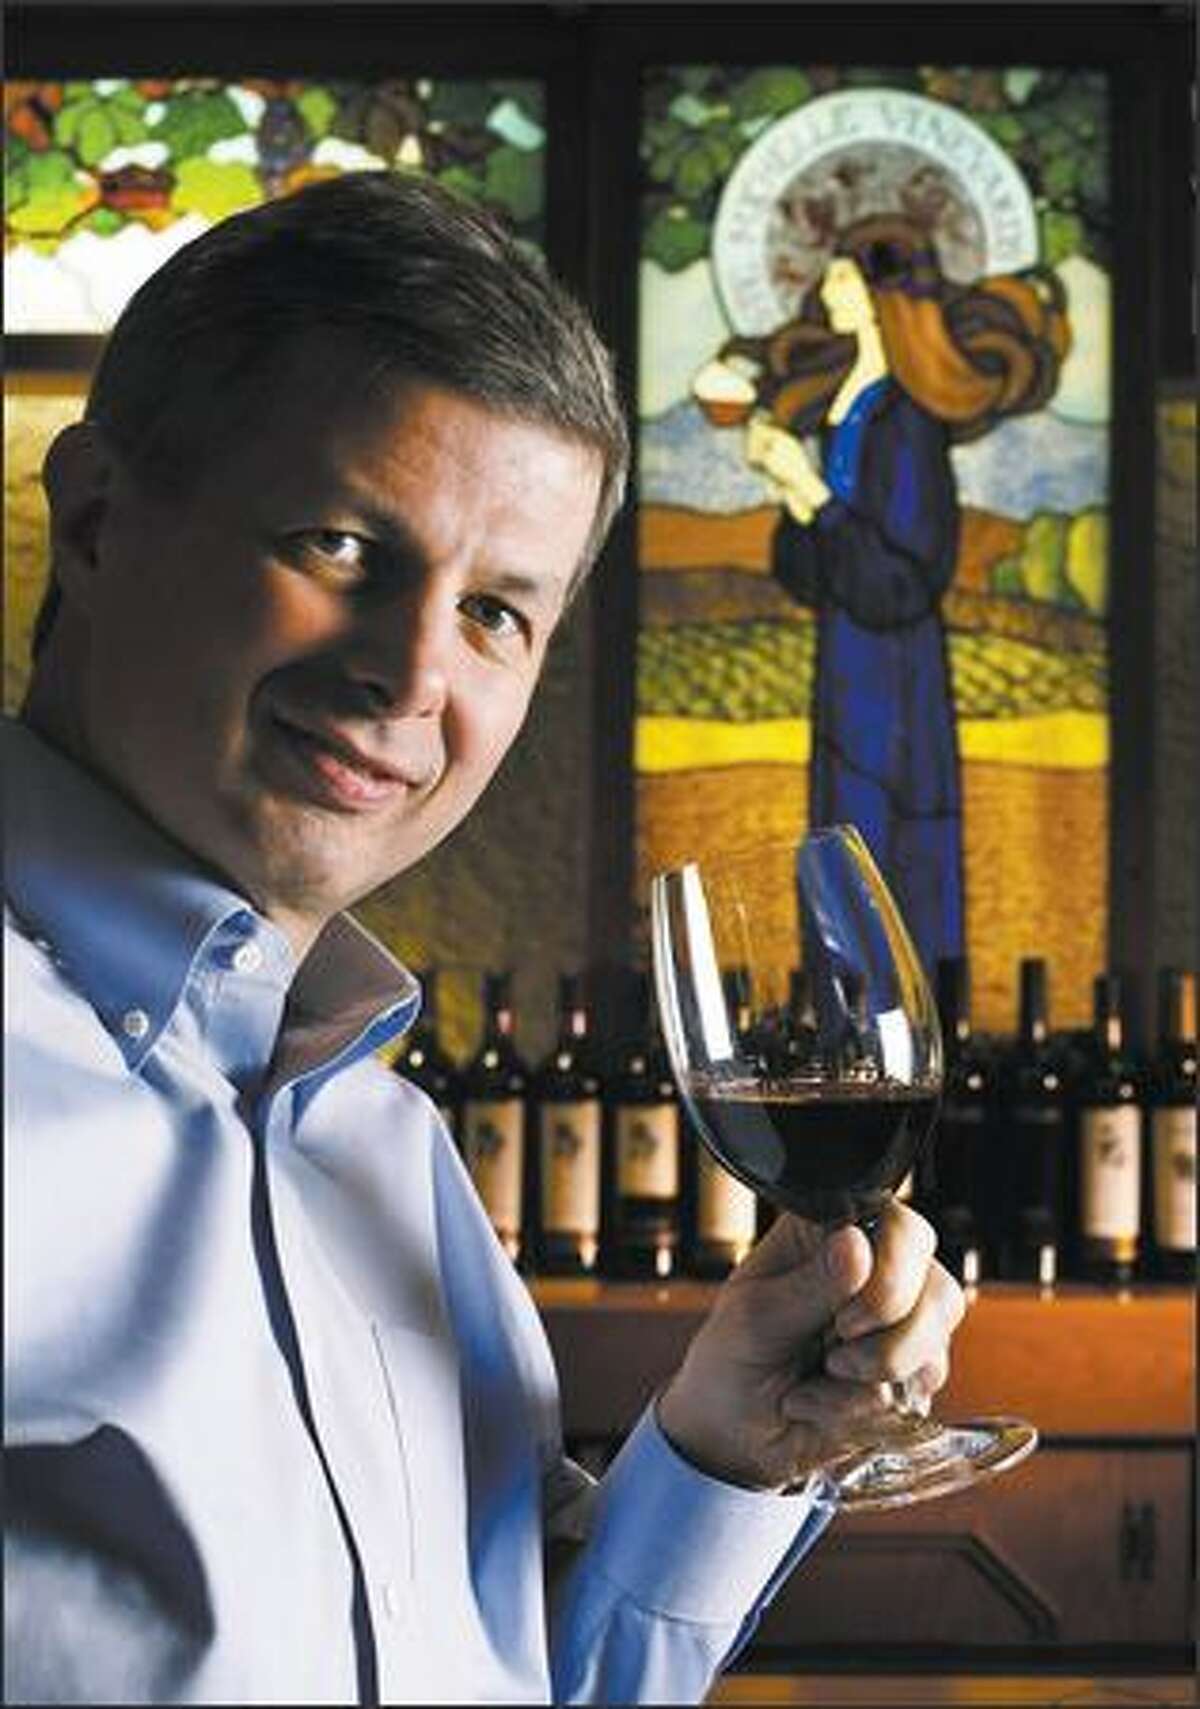 Ste. Michelle Wine Estates CEO Ted Baseler lifts a glass of 2004 Col Solare at a chateau tasting bar.